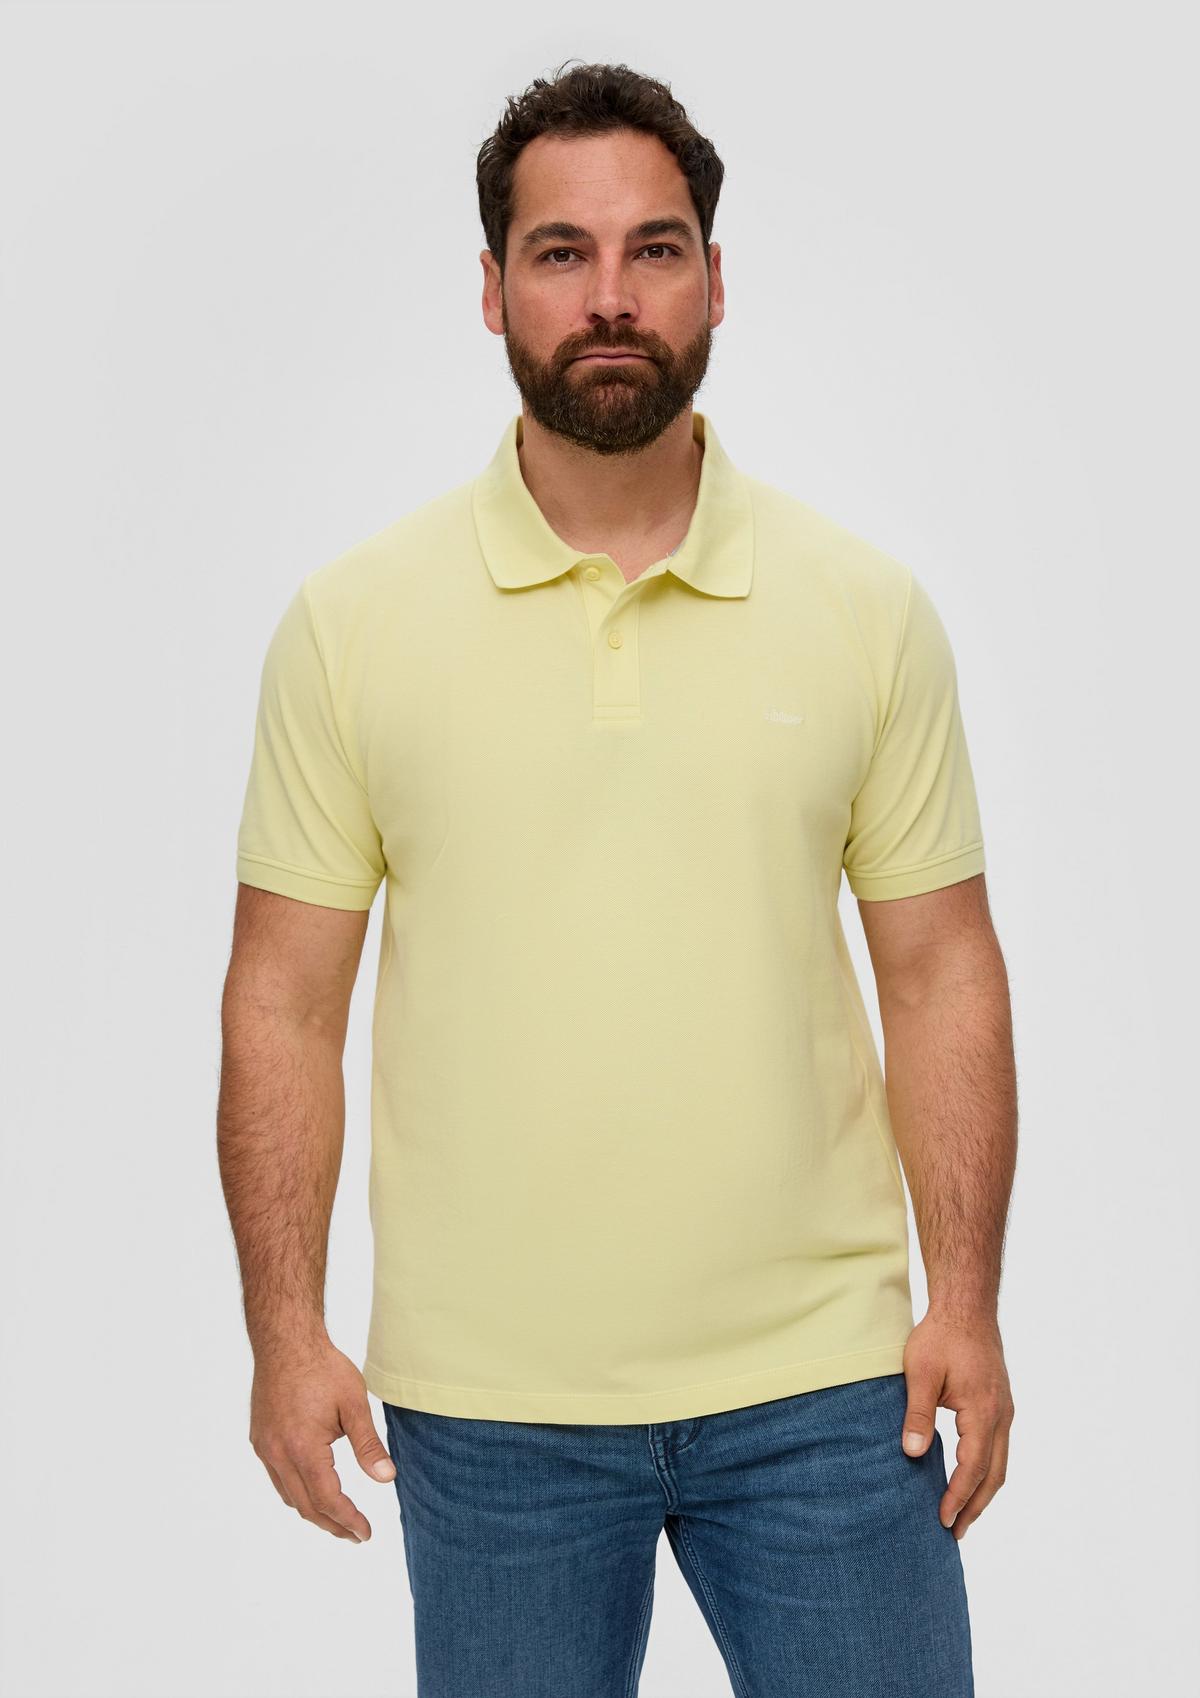 s.Oliver Polo shirt with a piqué texture